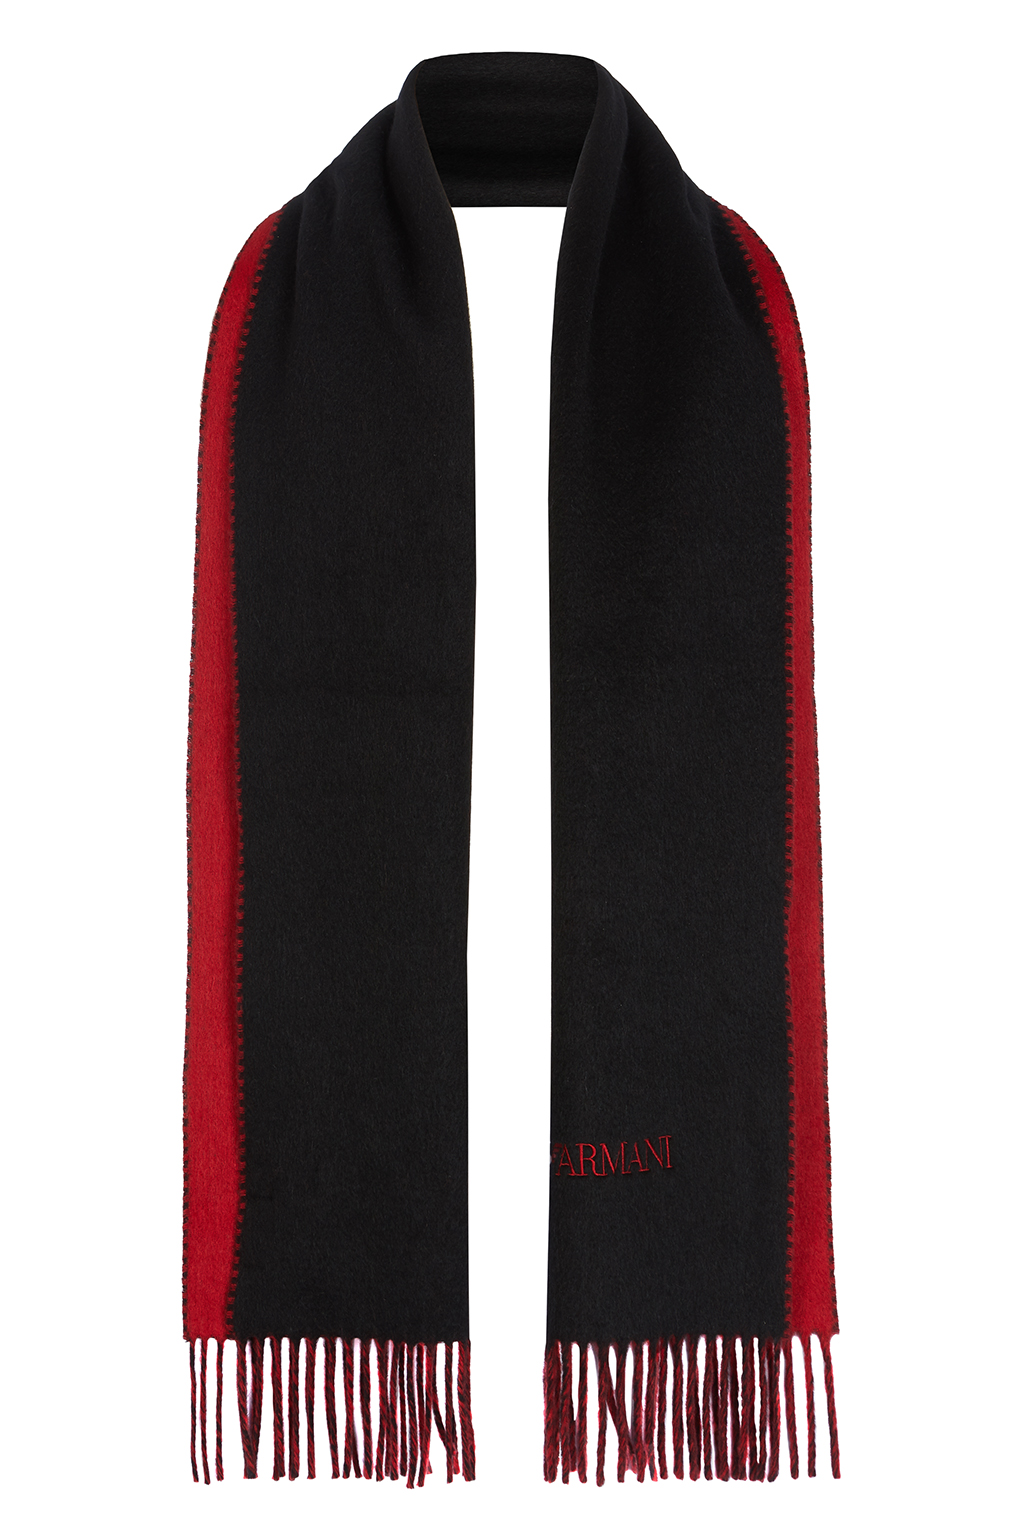 Emporio Armani Chinese New Year Cashmere Scarf